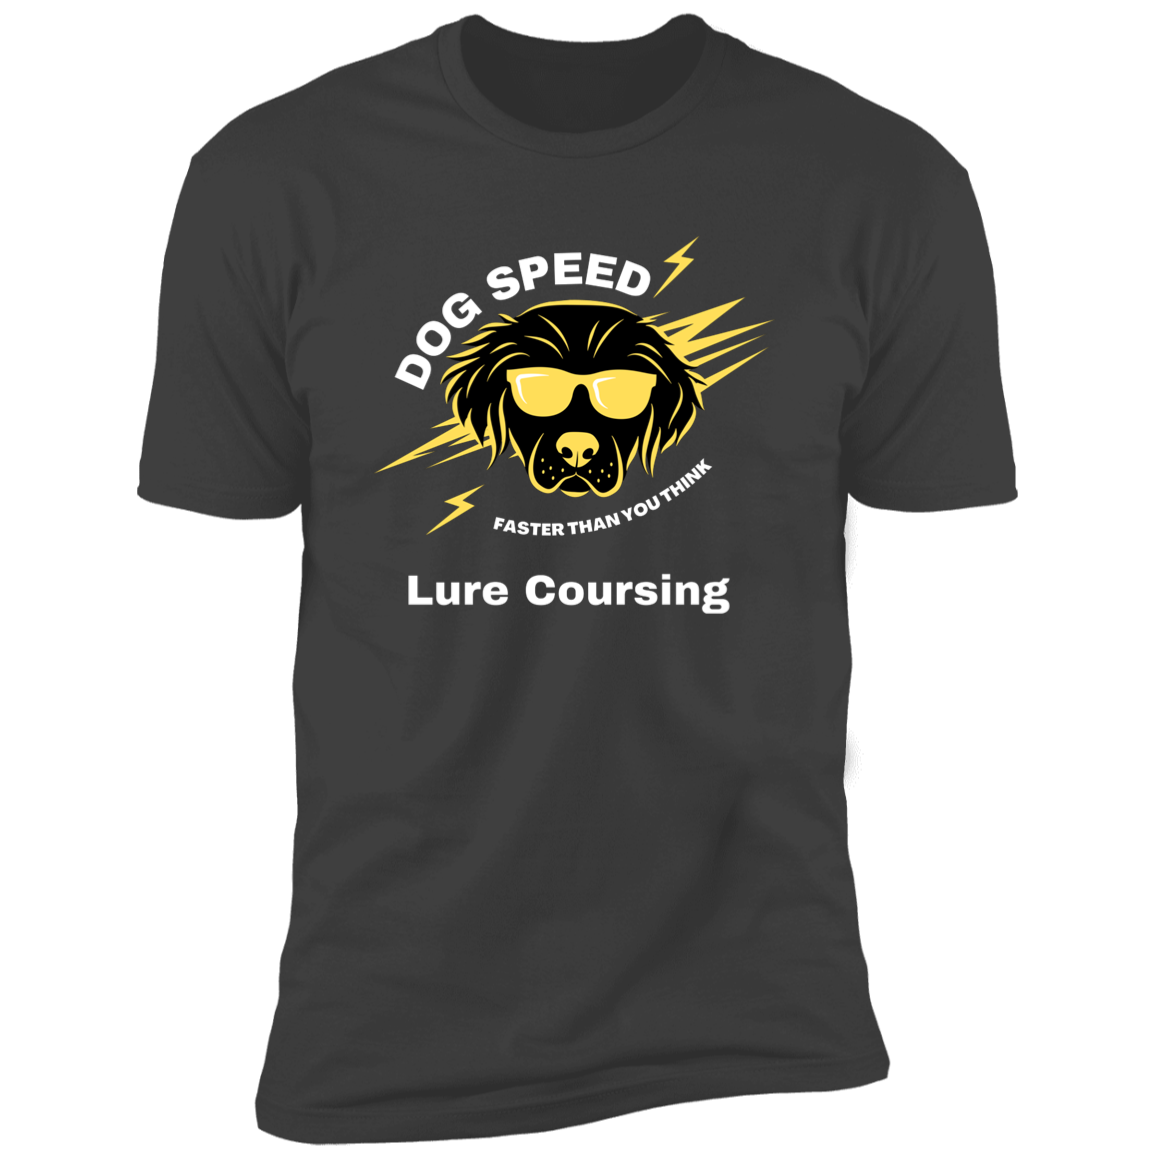 Dog Speed Faster Than You Think Lure Coursing T-shirt, Lure Coursing shirt dog shirt for humans, in heavy metal gray